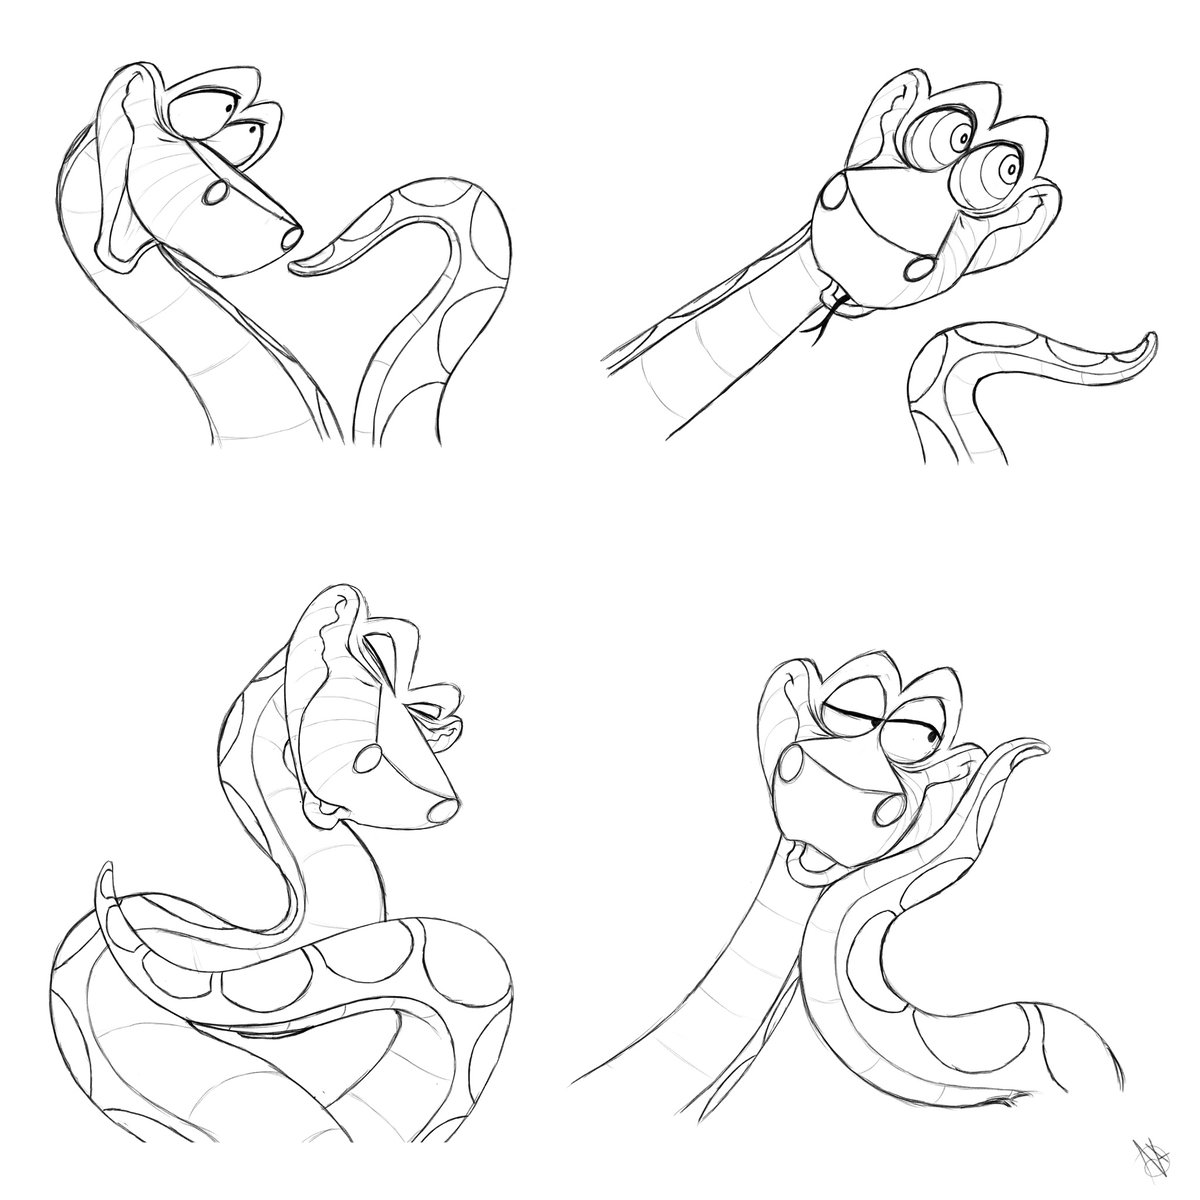 Moreeeee sketchesssss :3 One of the things I love about Kaa is how expressive he is, and the use of his tail/coils to help show those expressions without the use of hands and arms. Just my little take on a few expressions here :3 Hope everyone’s having a good Monday so far! 💜